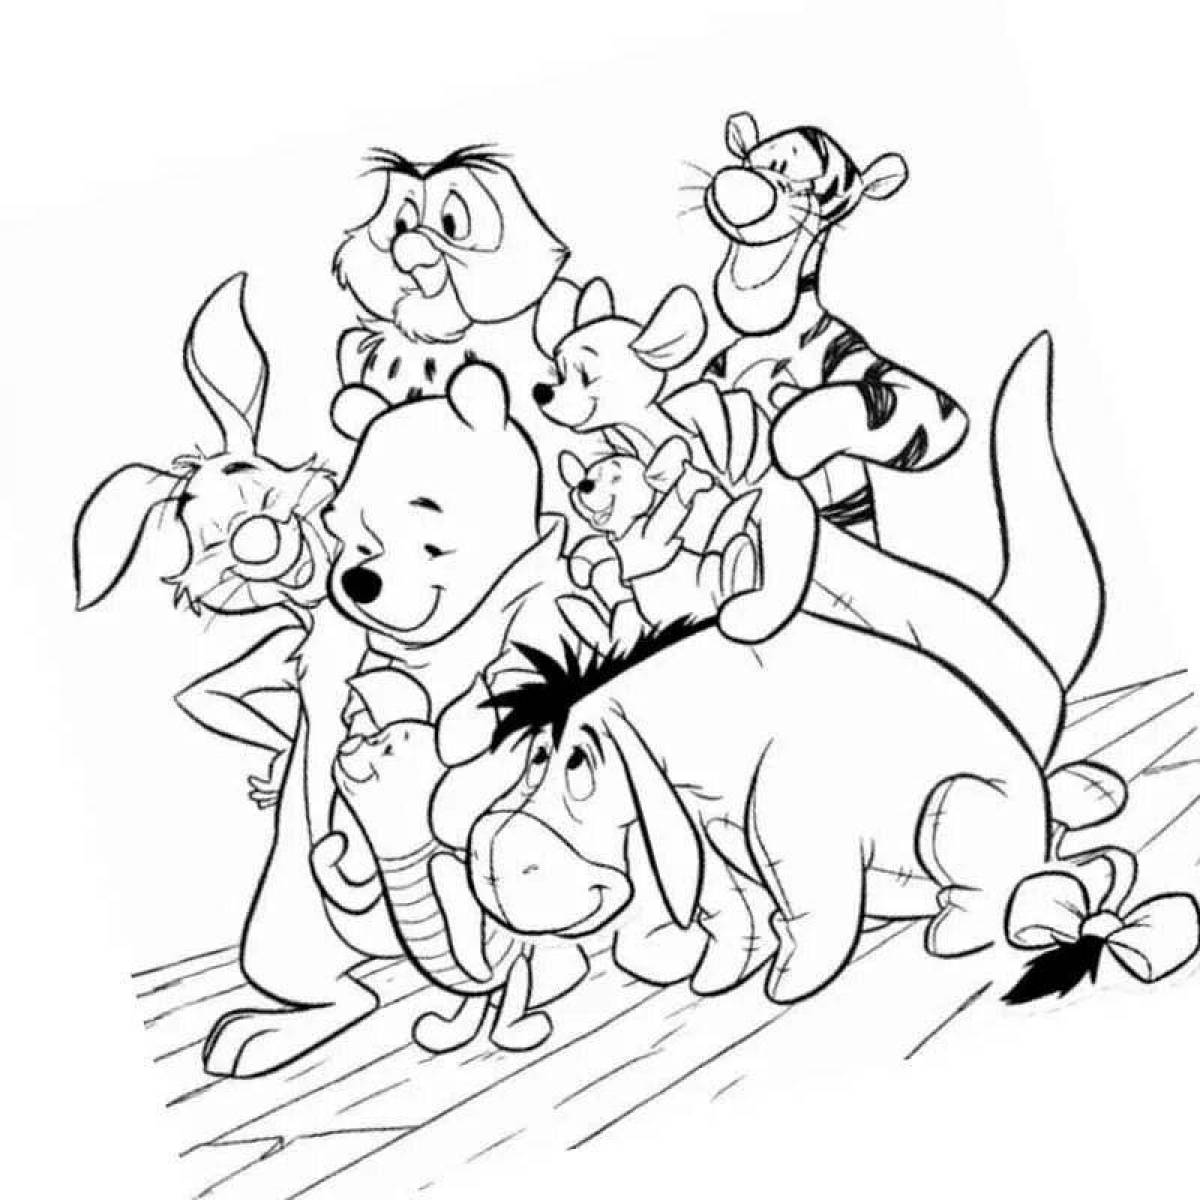 Coloring fairy tale cartoon characters